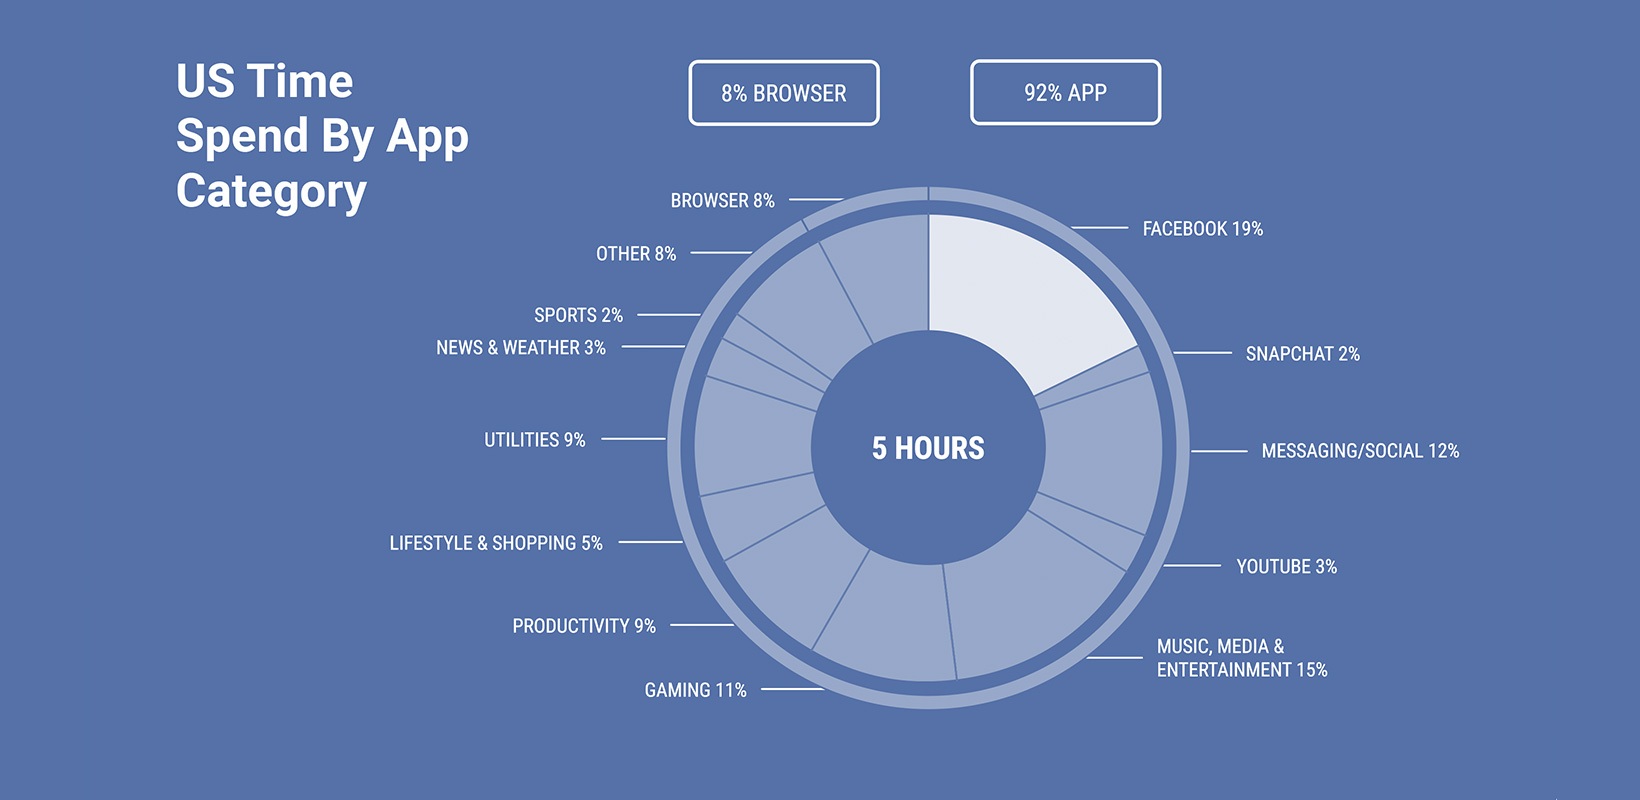 Mobile users spend more time on Facebook than any other app